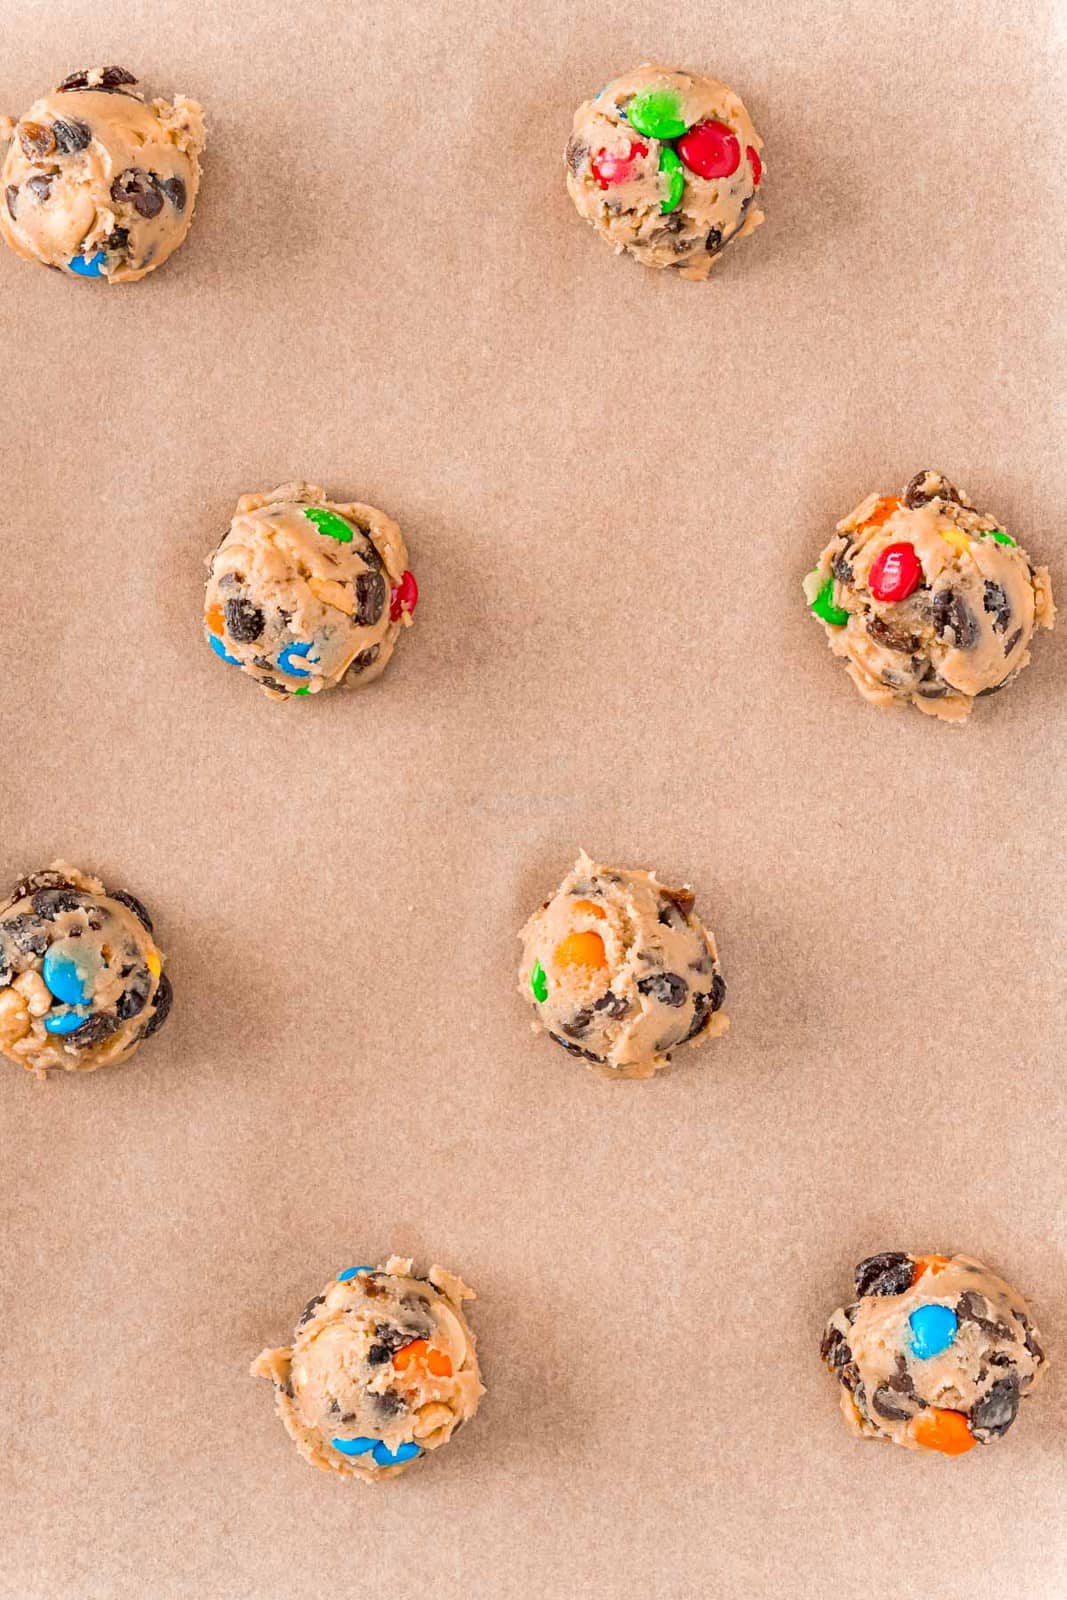 Cookies placed on parchment lined baking sheet.